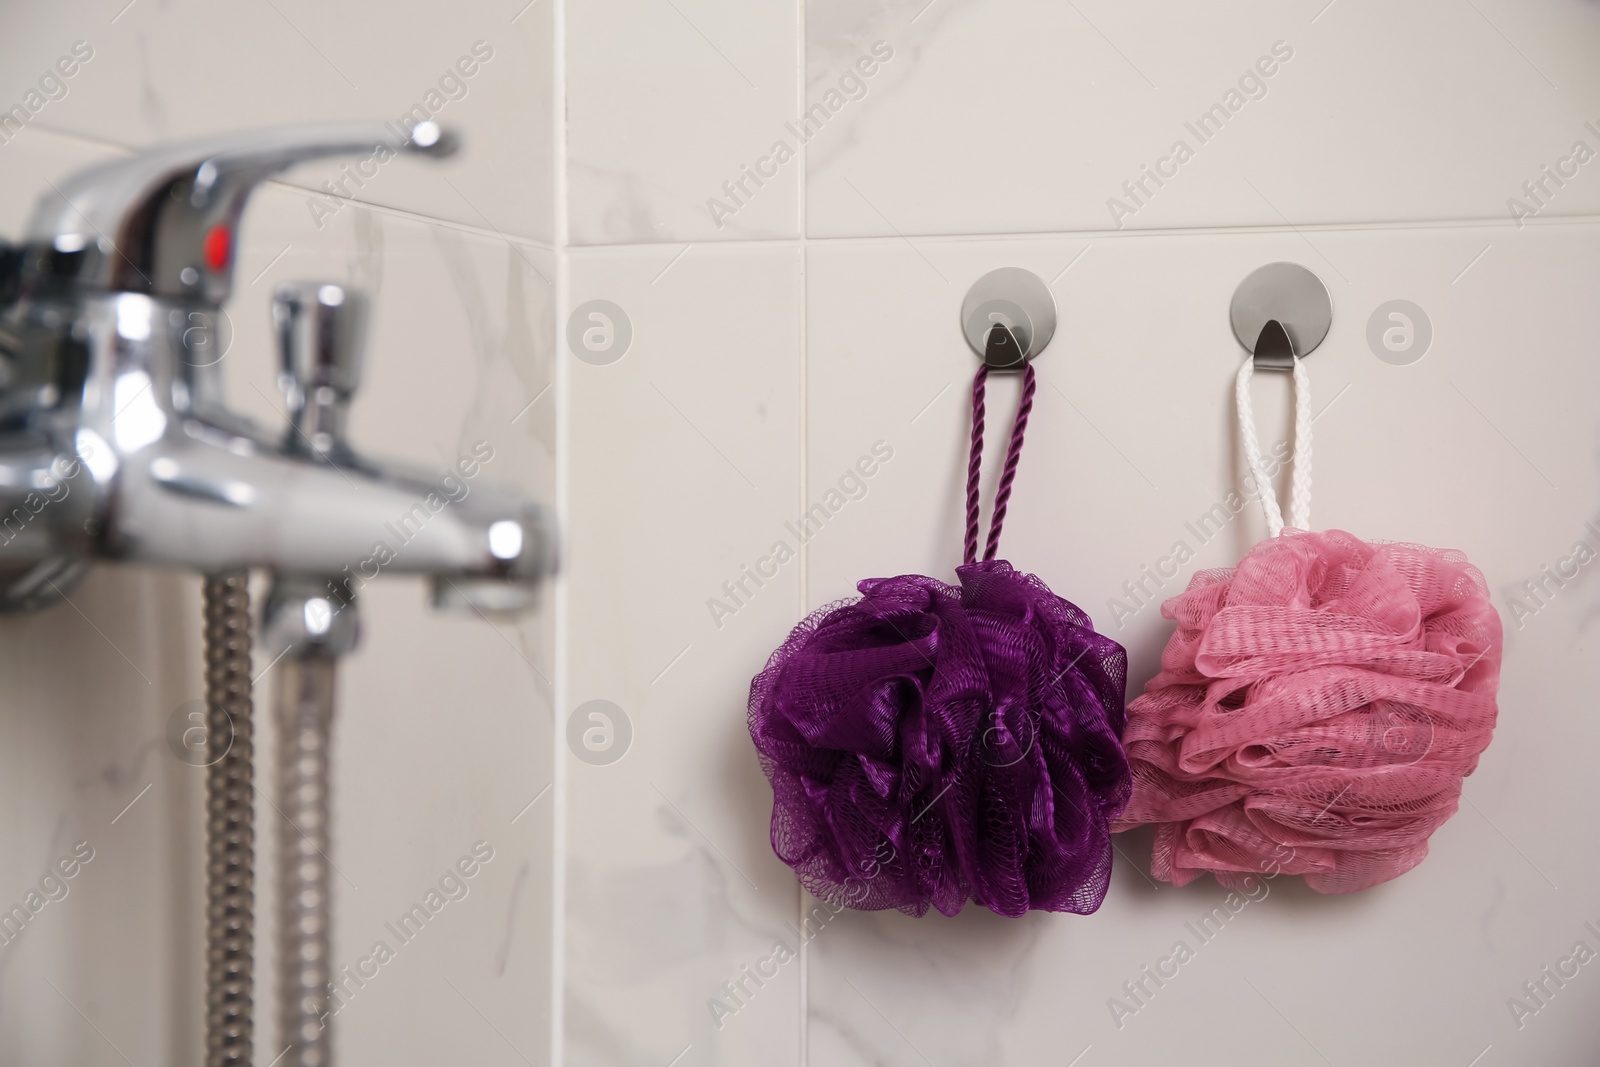 Photo of Shower puffs hanging near faucet in bathroom, space for text